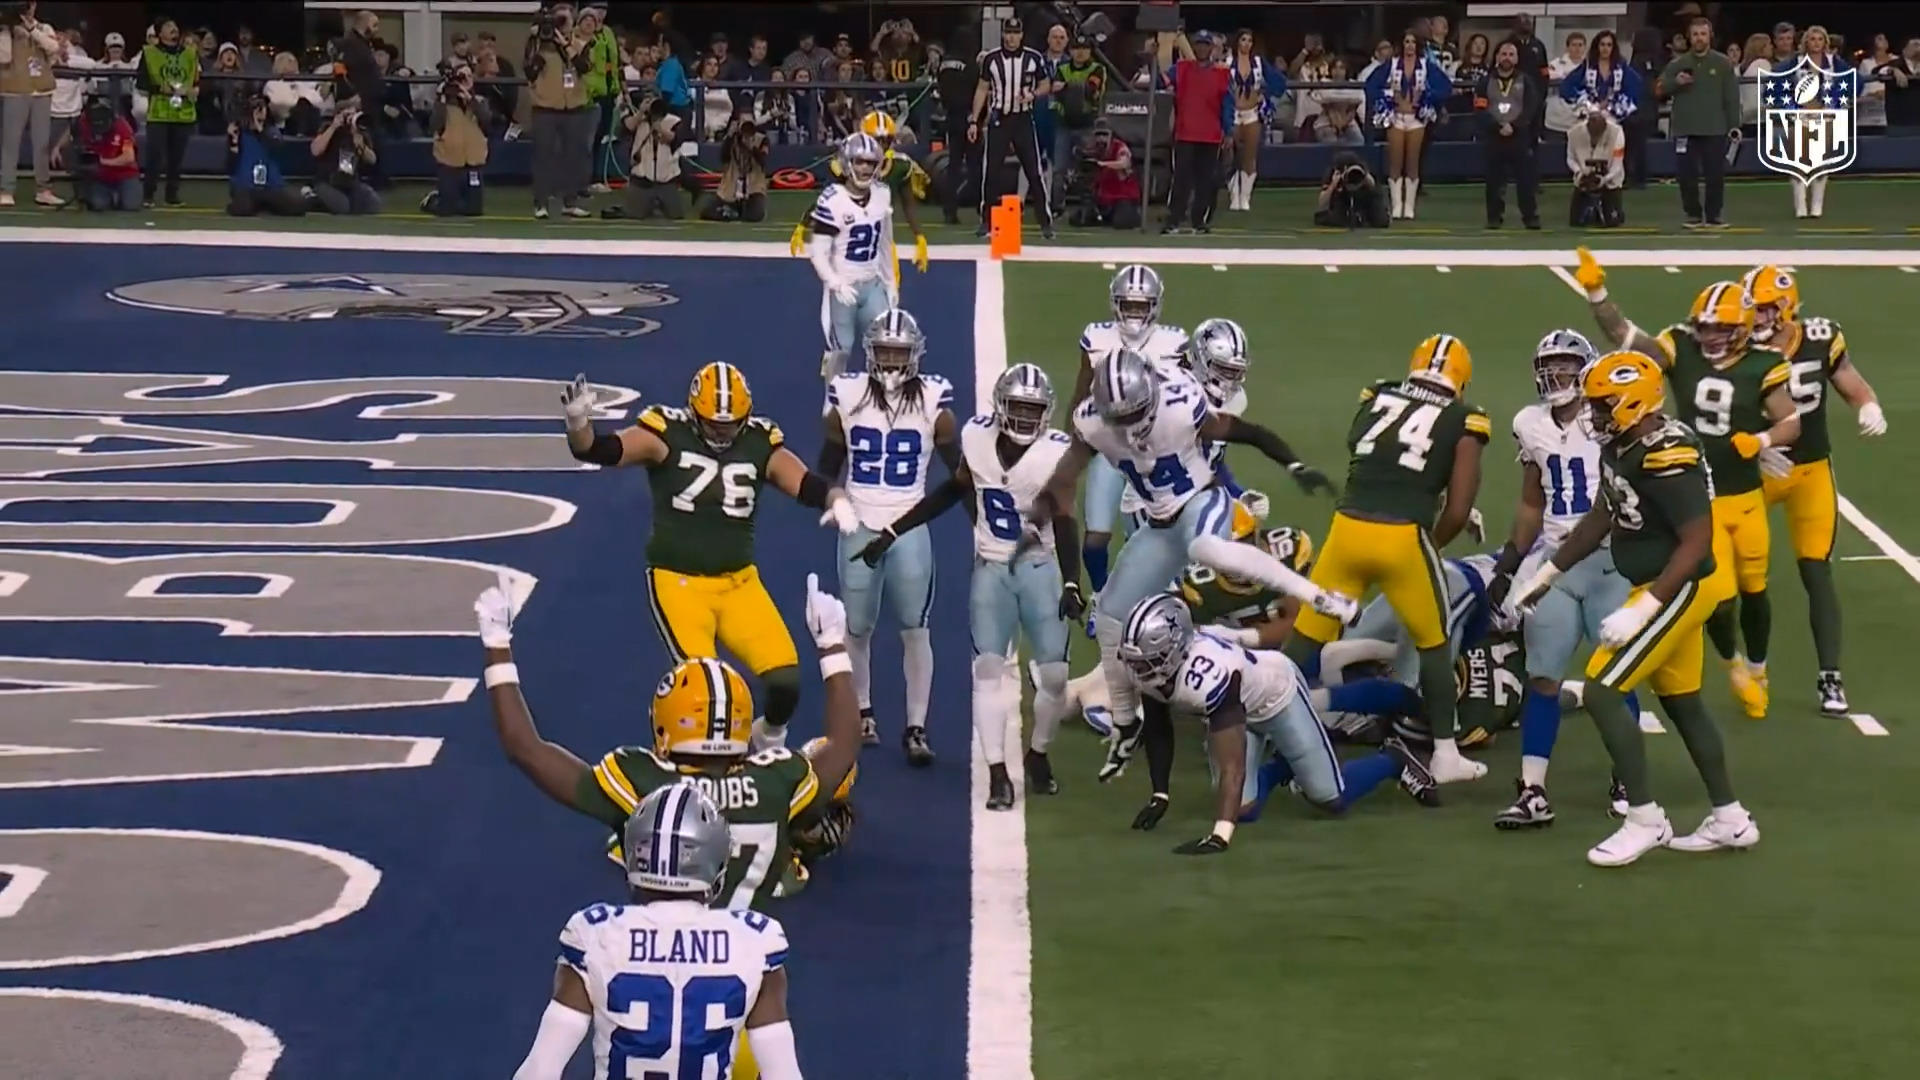 Playoff Clap!  Packers lead Cowboys before highlights in video